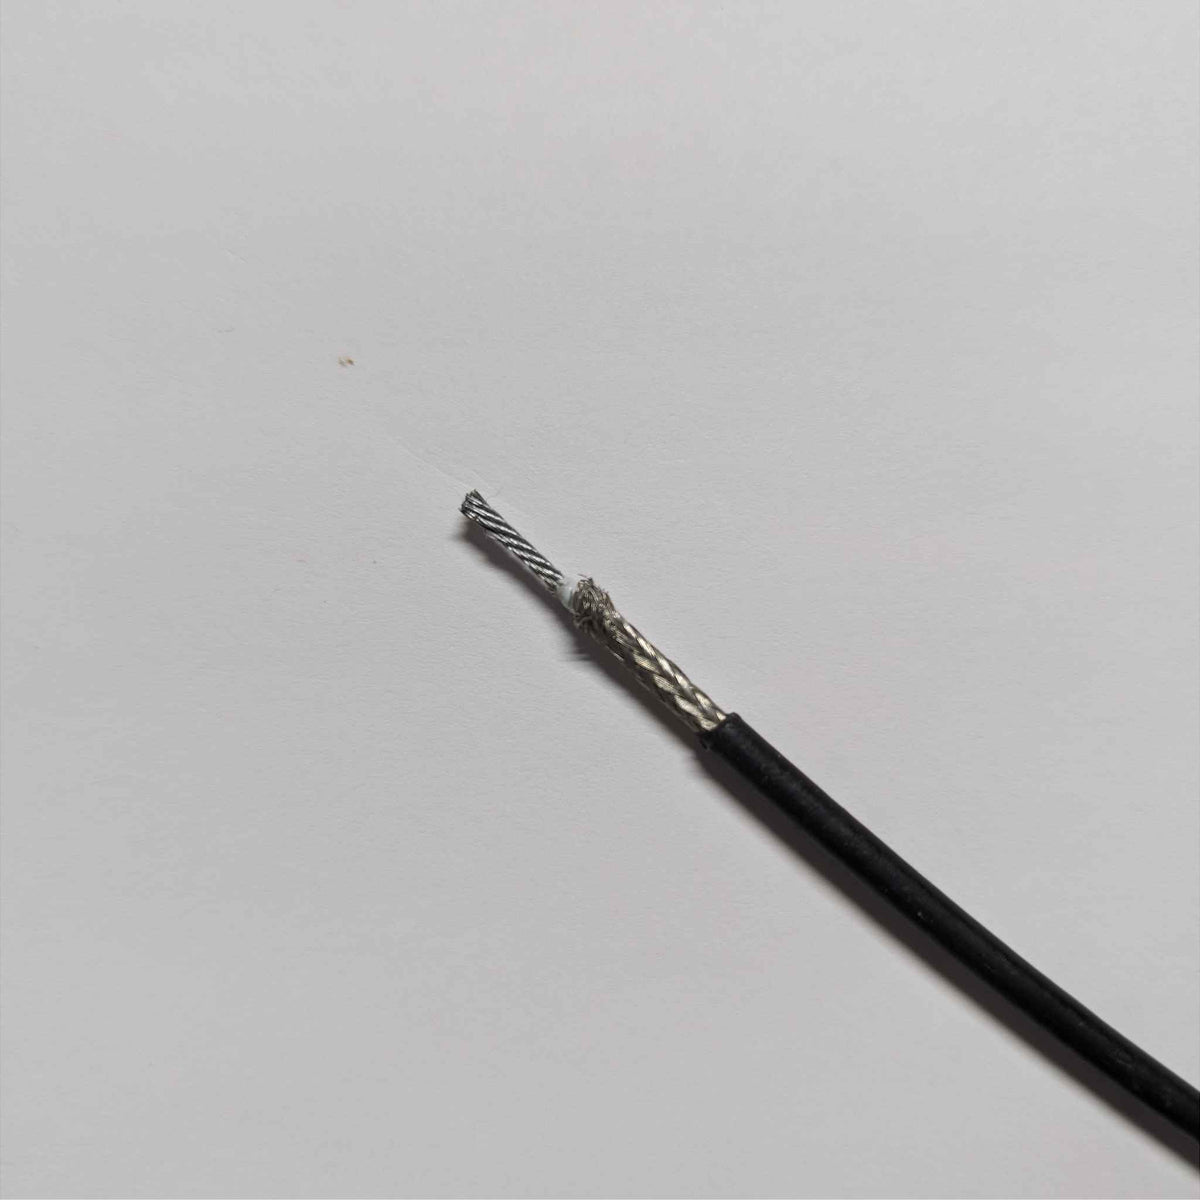 This Is a Close up of Our Anti Two Block Cable. It Shows the Inner Cable and Shielding.